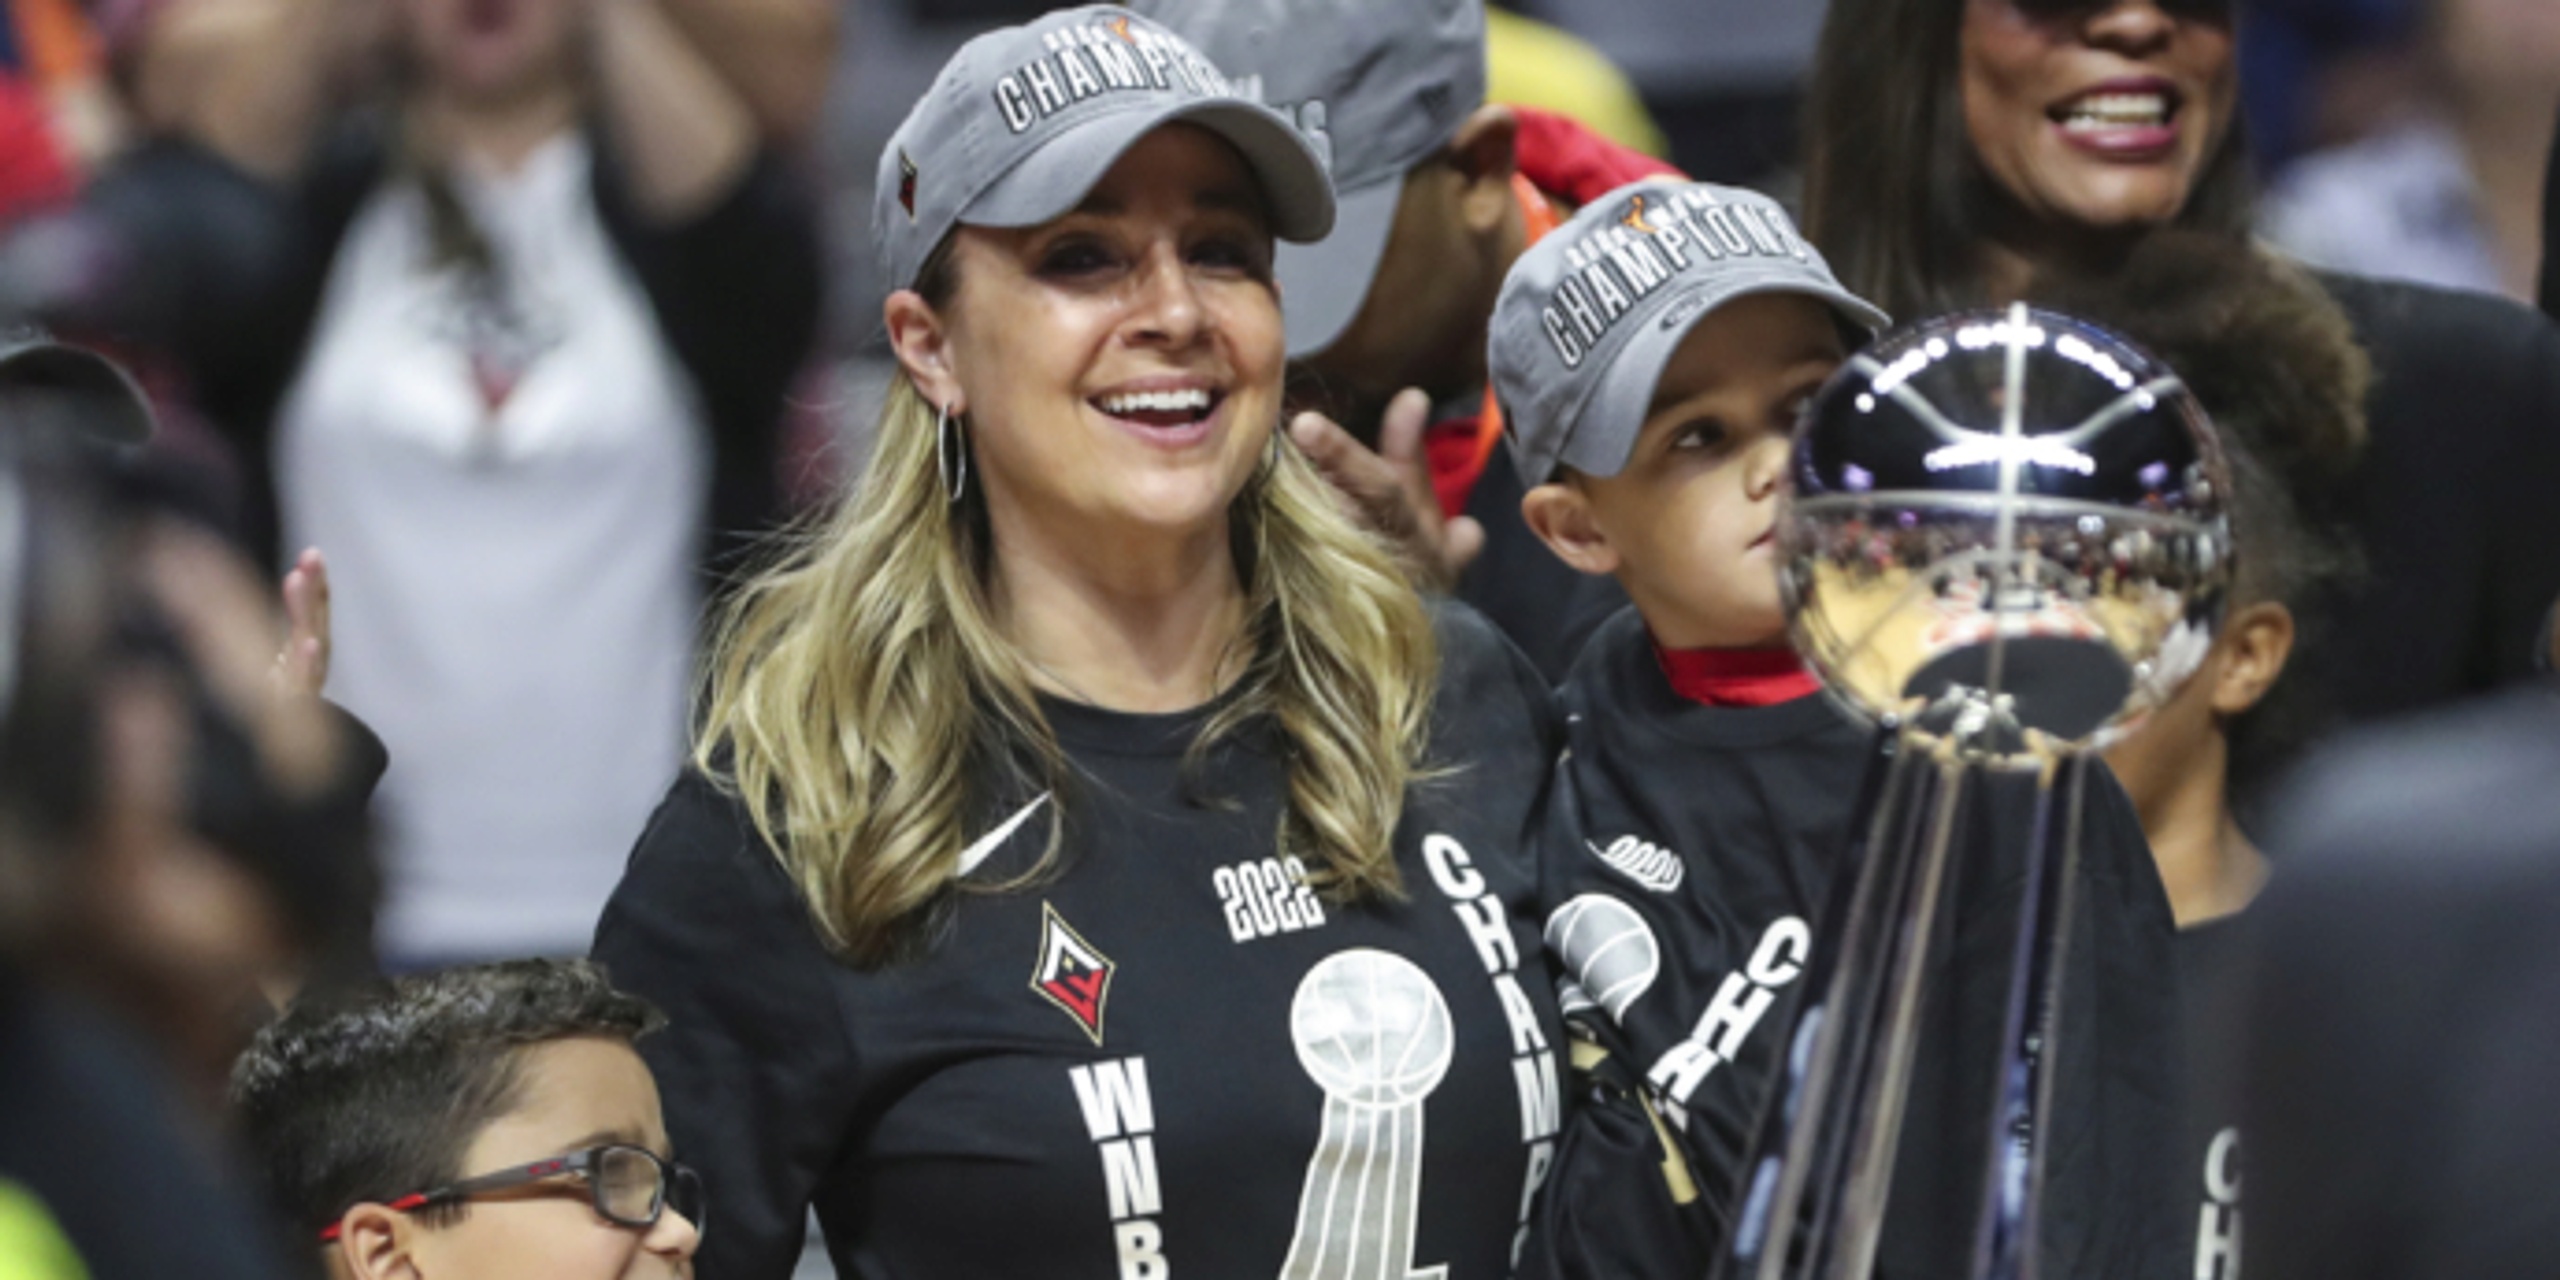 Becky Hammon's NBA coaching influences showed in Aces' WNBA title run